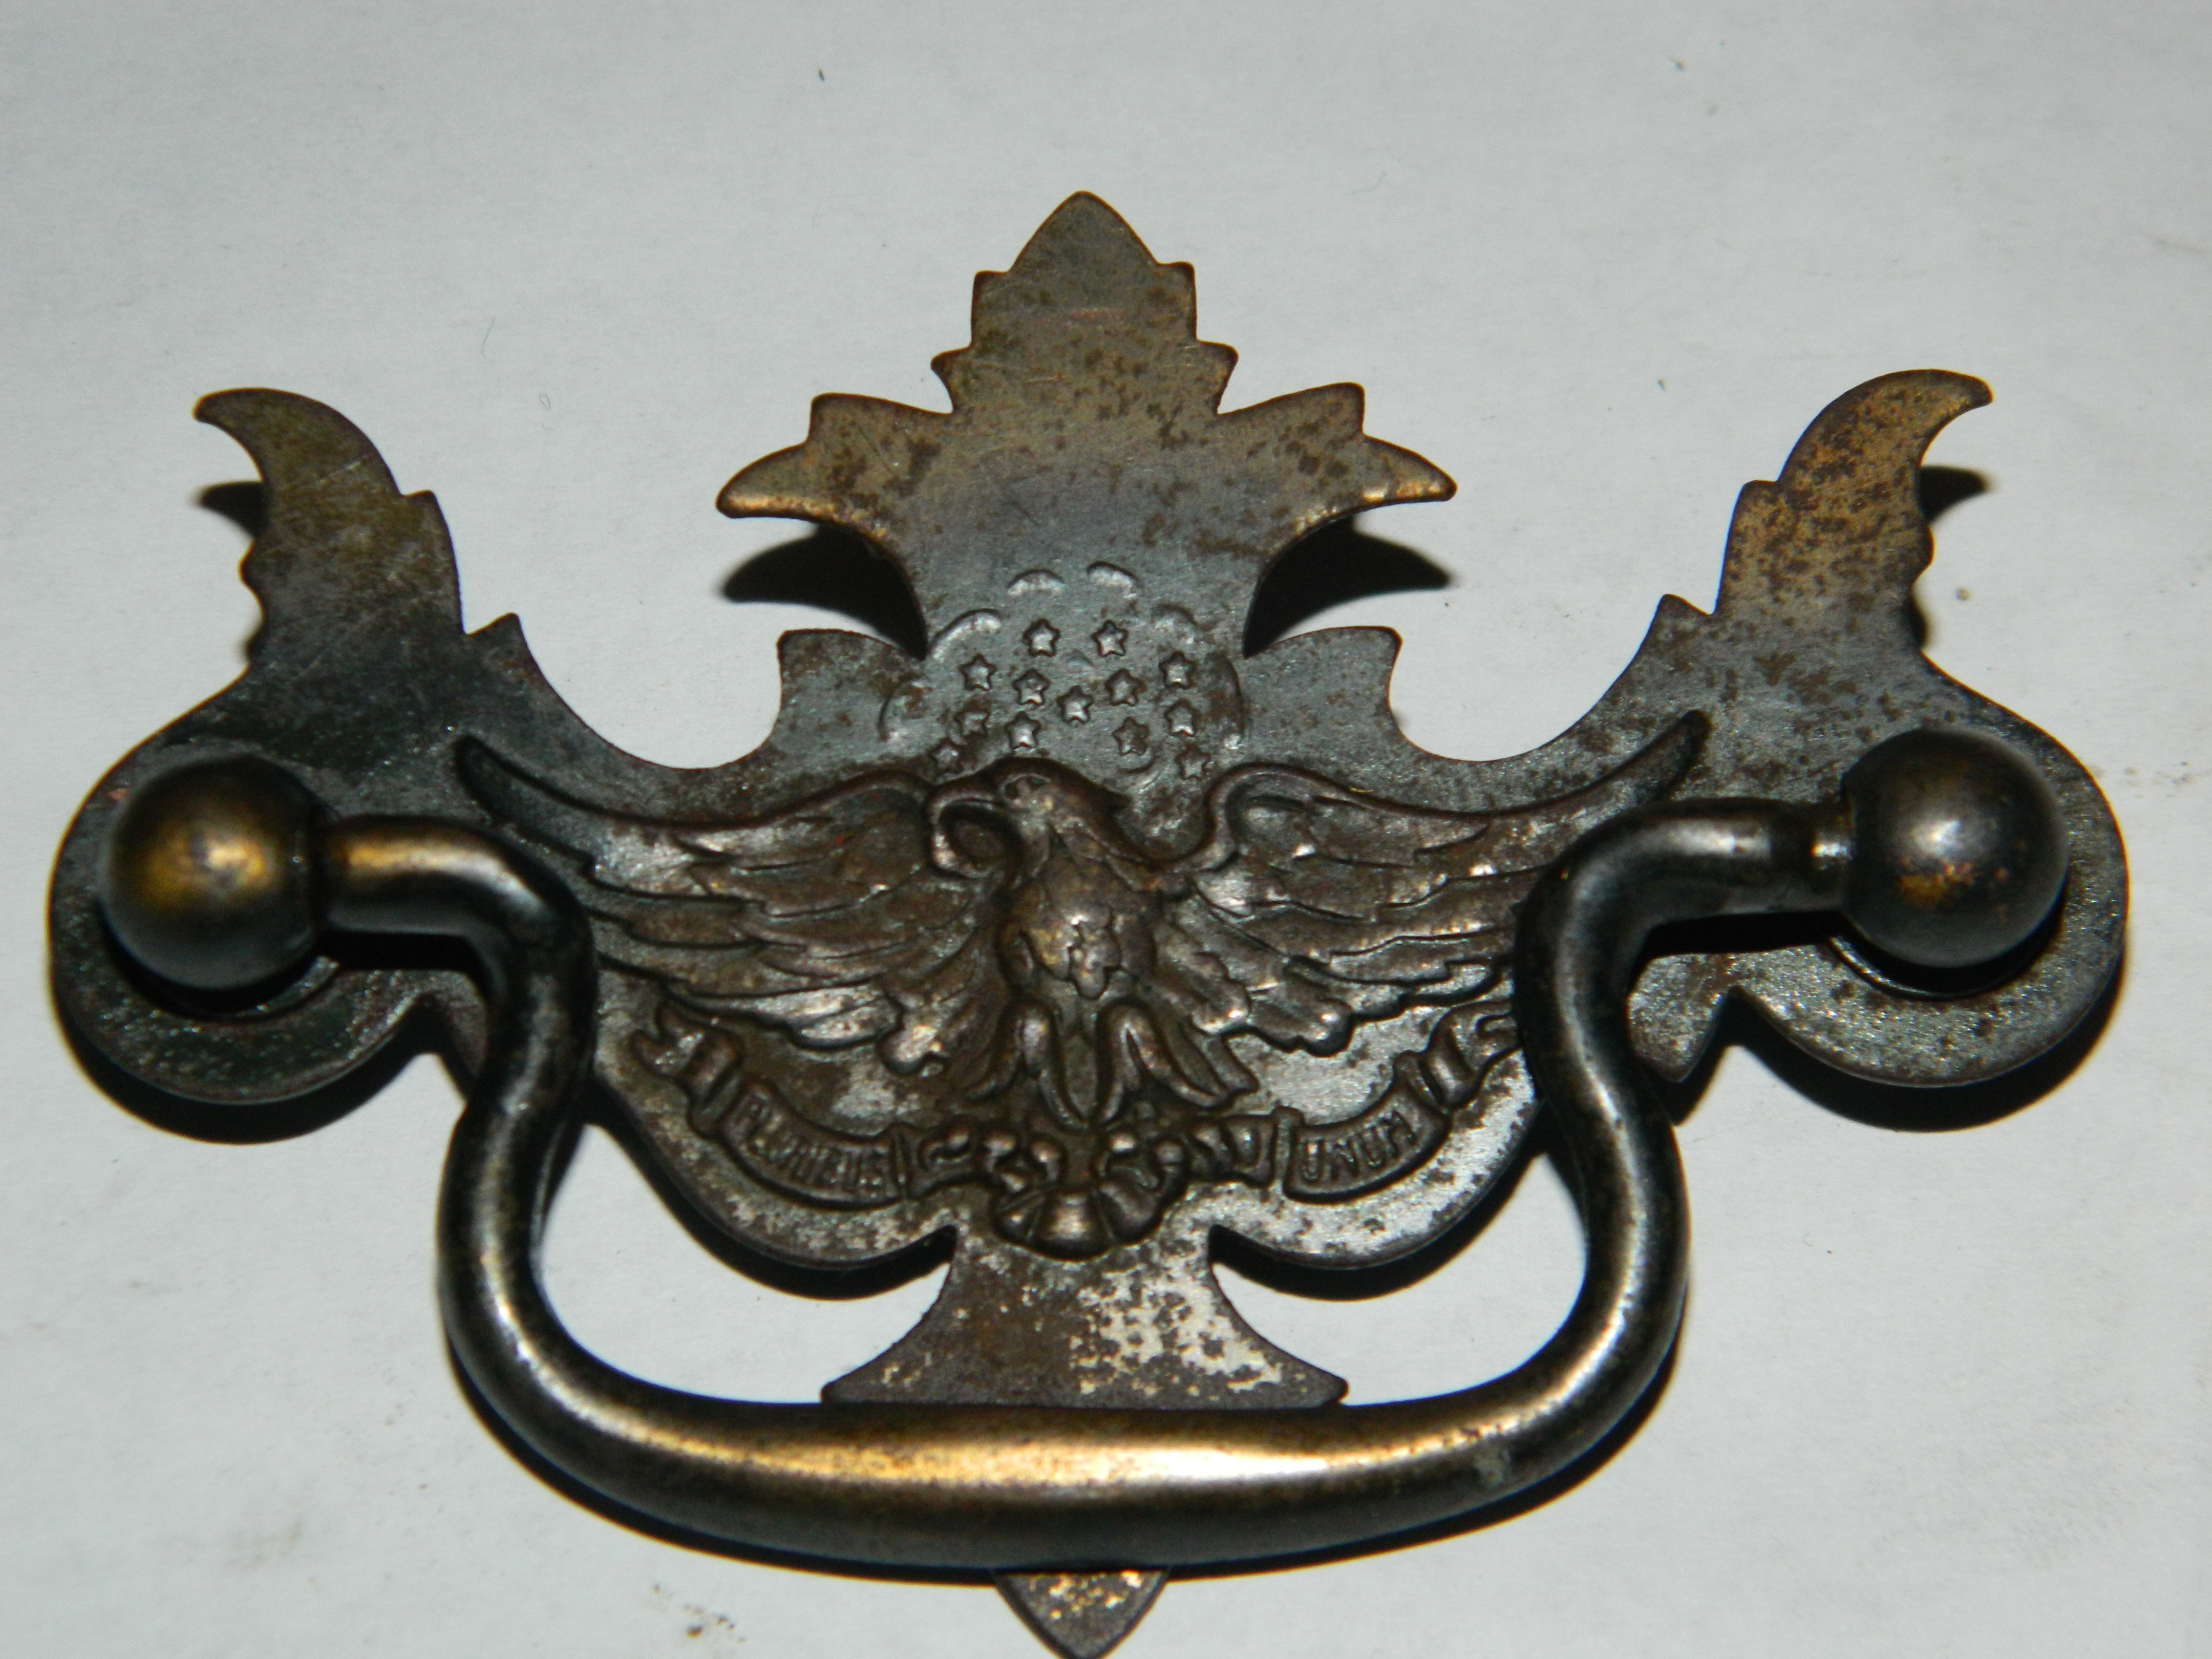 Antique Hardware Drawer Pull Handle intended for sizing 4320 X 3240